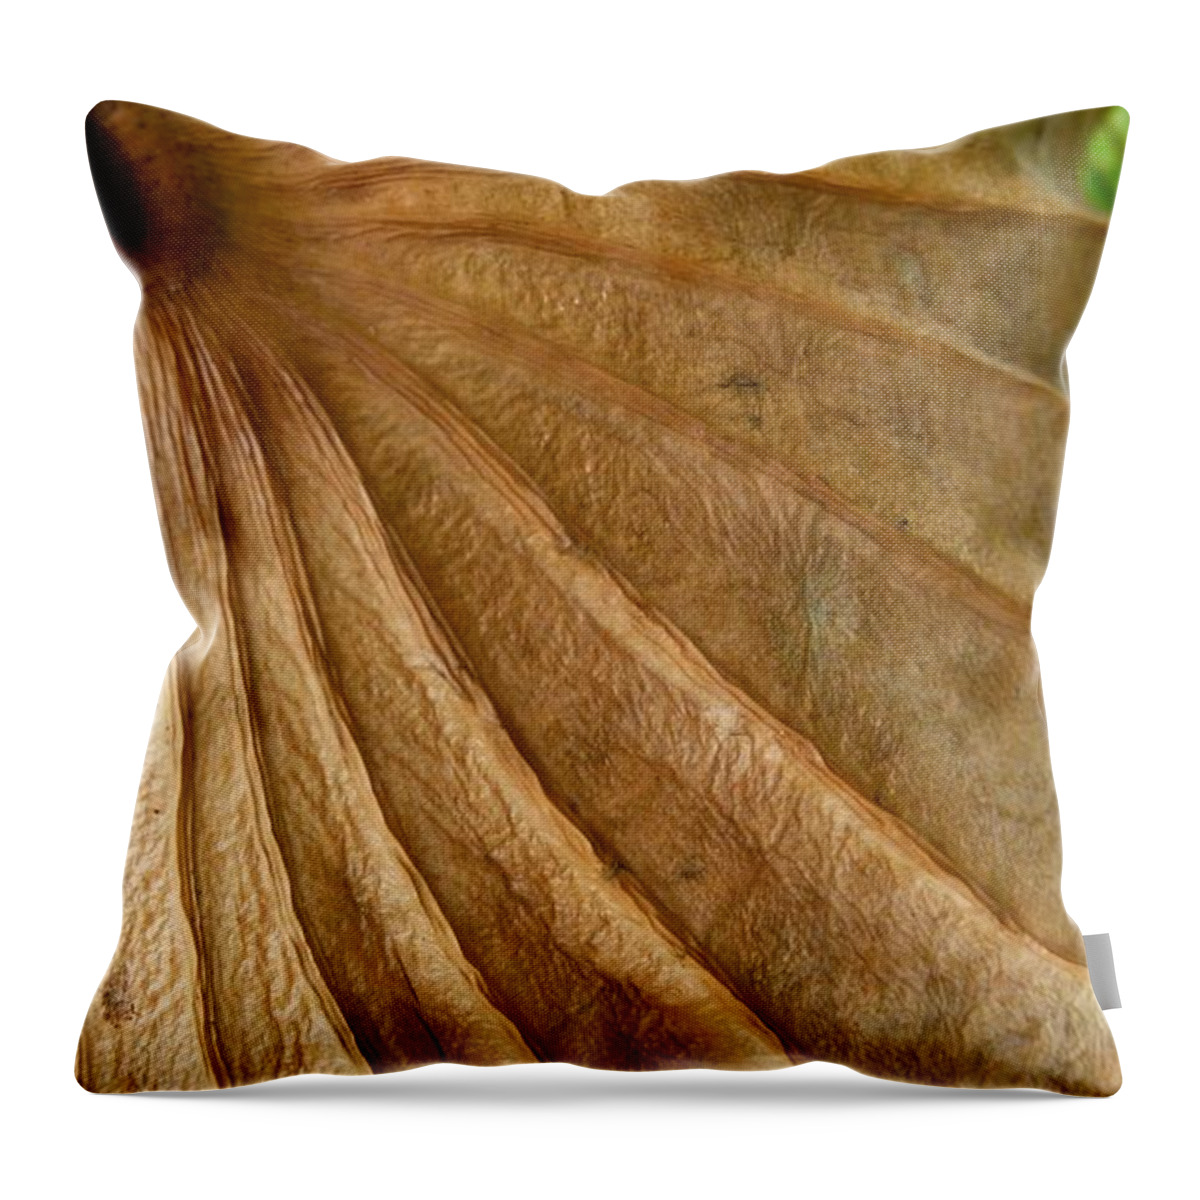 Jane Ford Throw Pillow featuring the photograph Lotus Leaf by Jane Ford